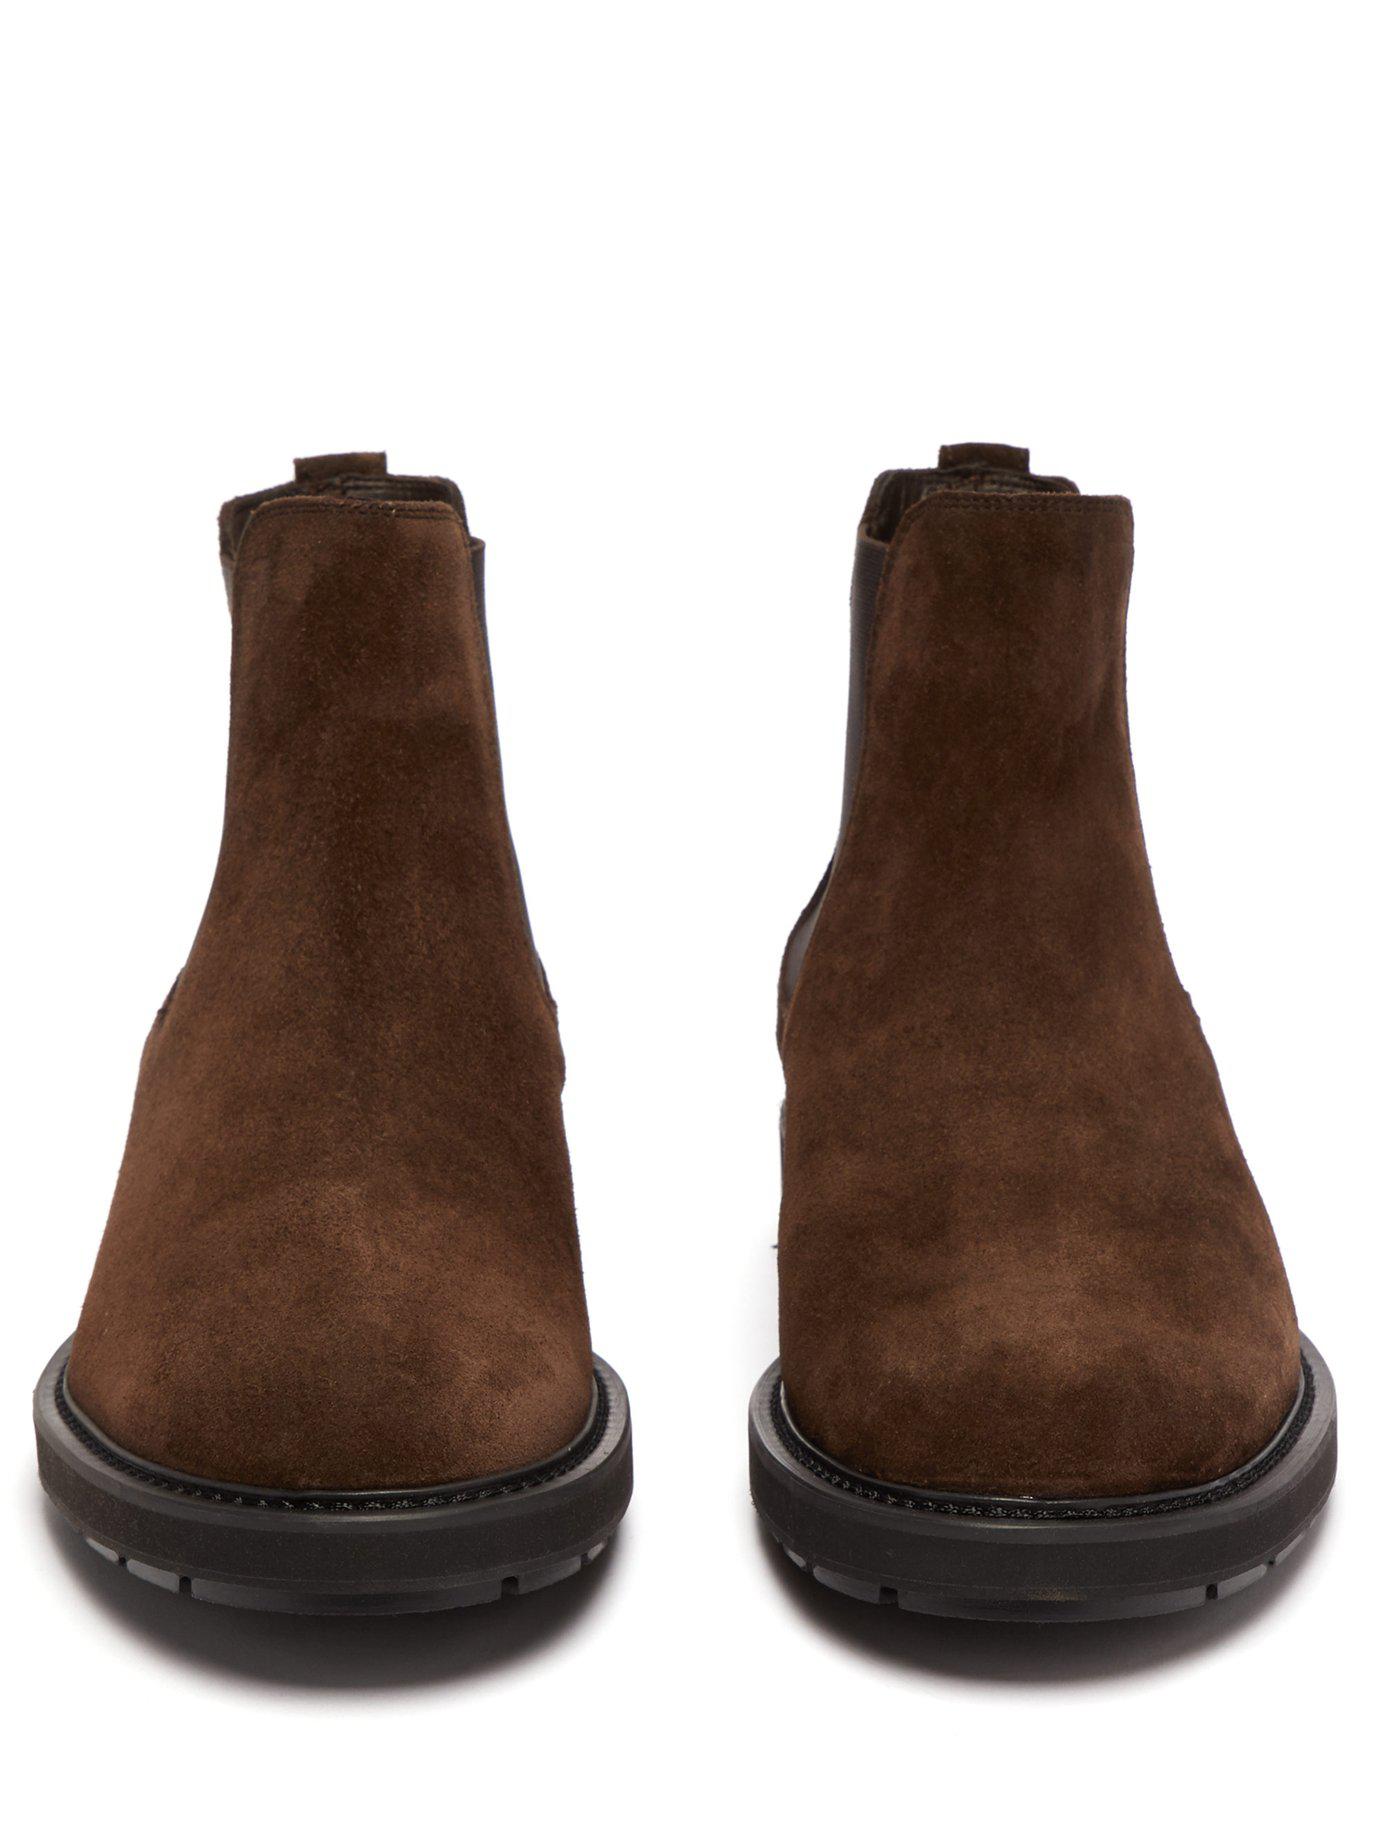 Tod's Suede Chelsea Boots in Brown for Men - Lyst